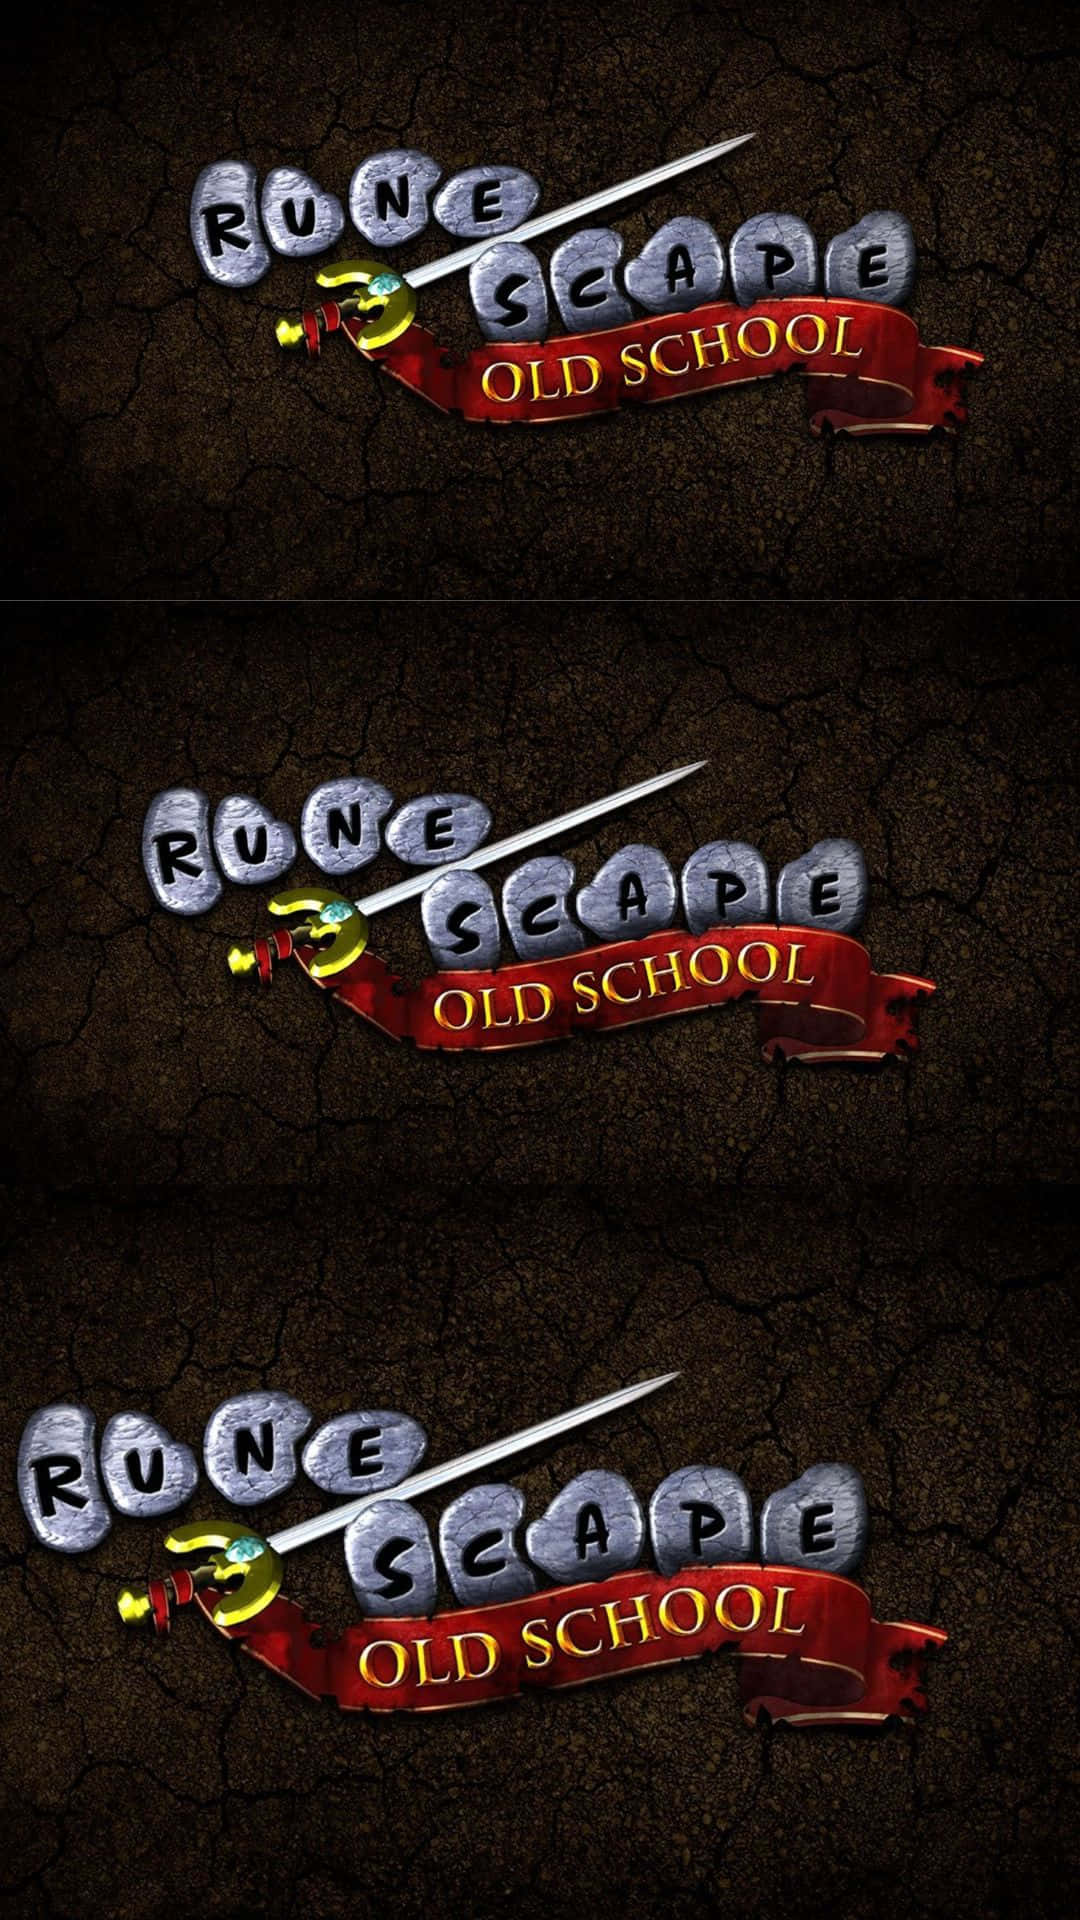 A classic adventure with a modern twist. Play Runescape Oldschool on your Android device today.